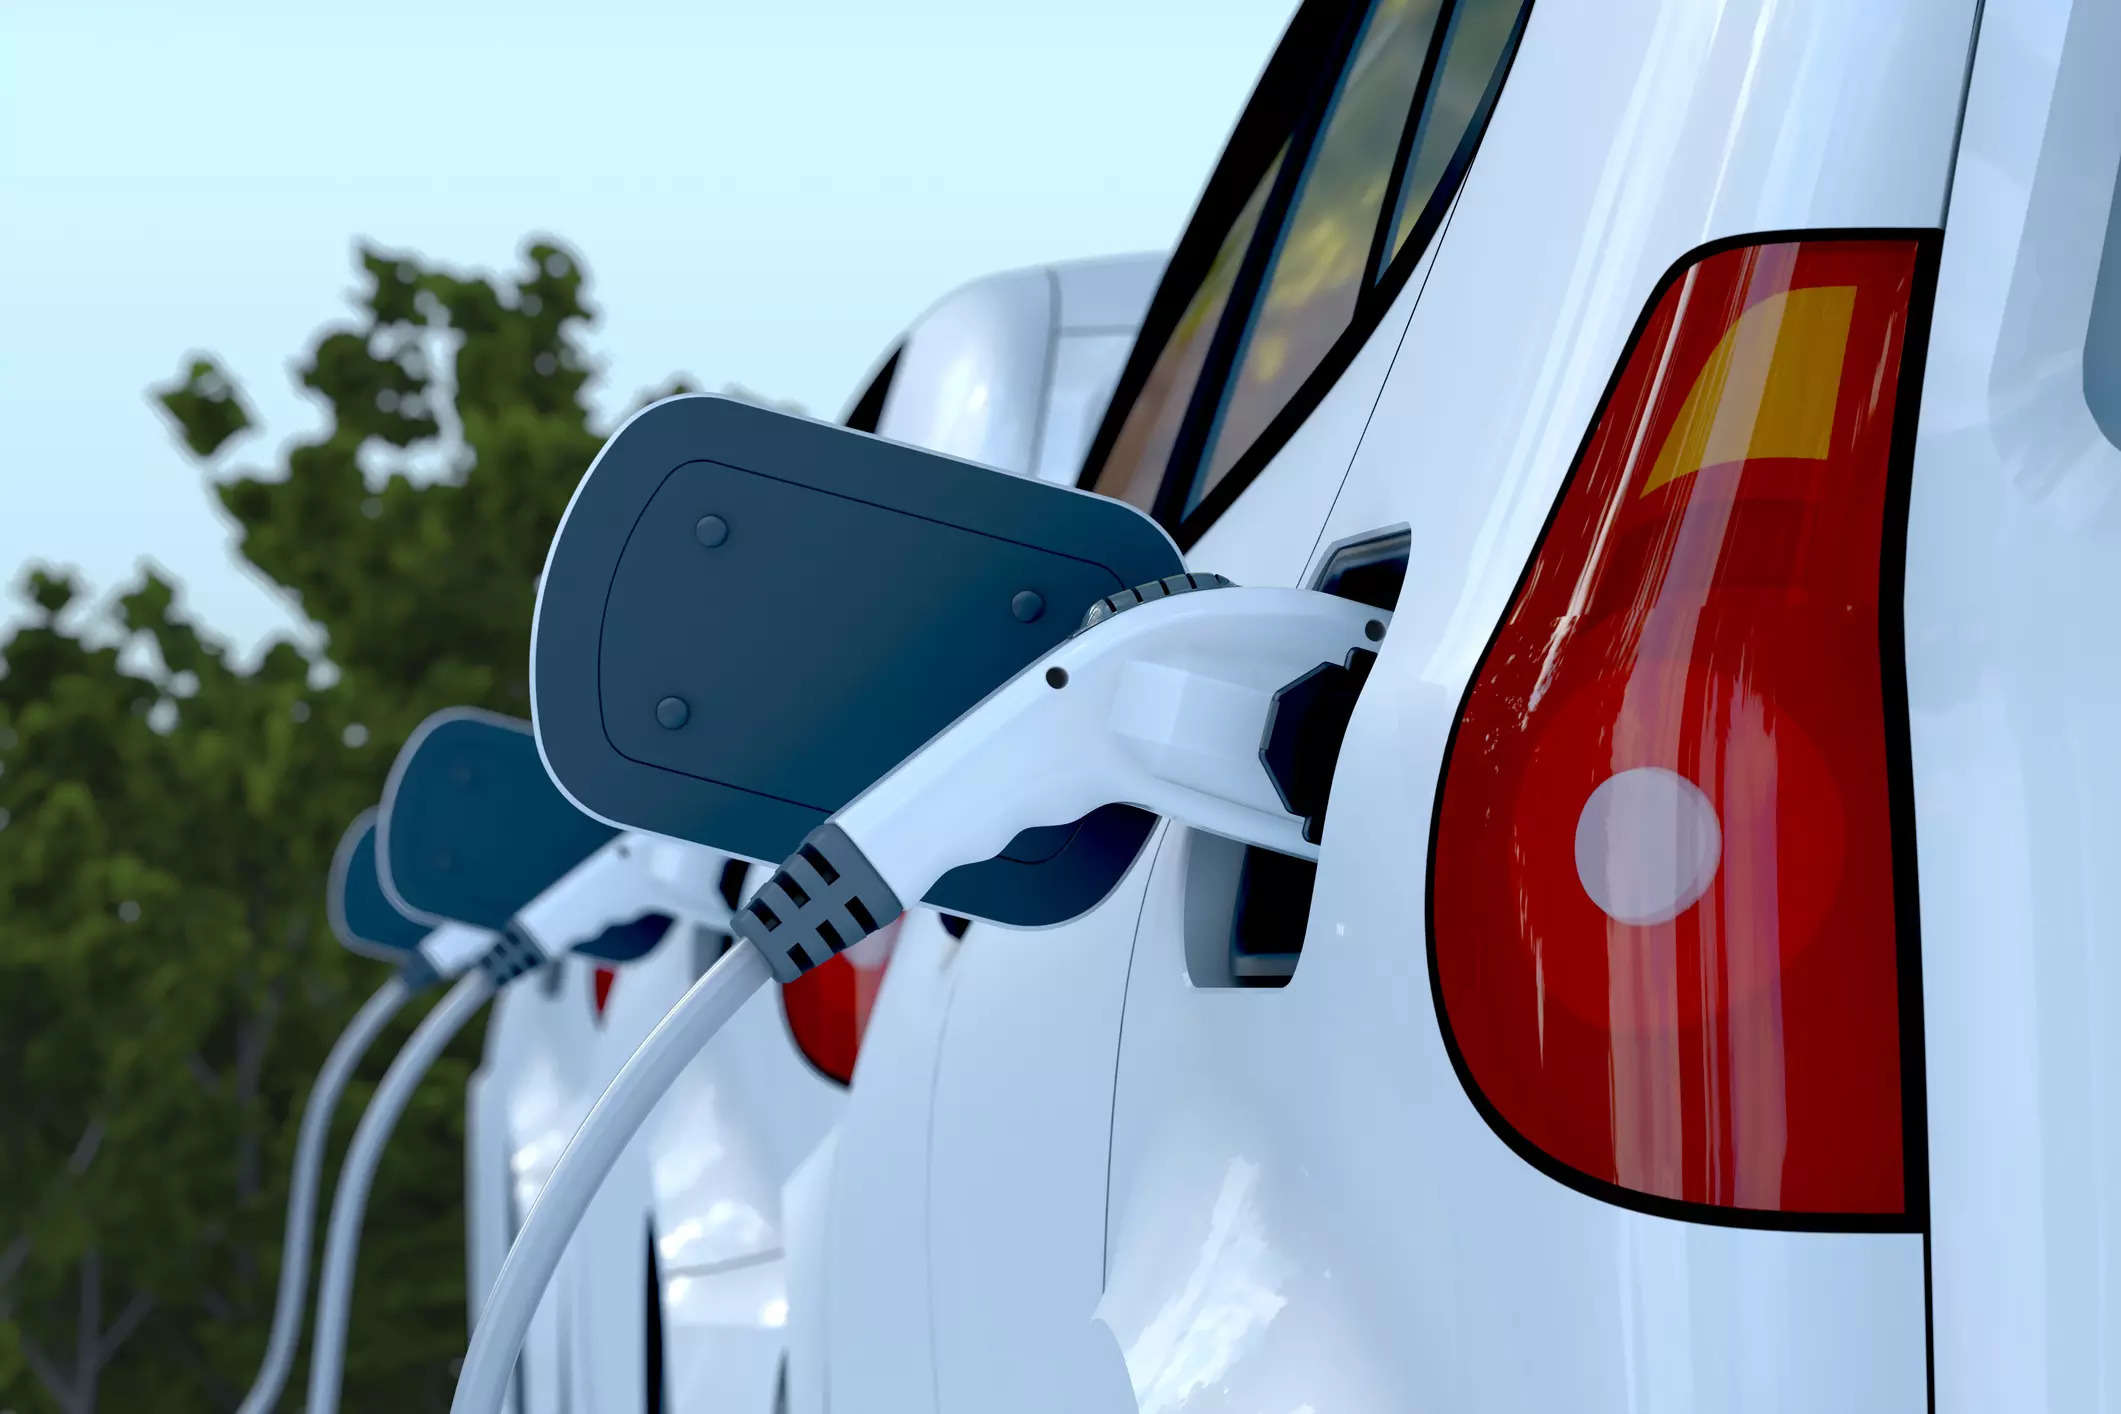  &quot;EVs are an important powertrain technology to help reduce CO2 emissions from the transportation sector,&quot; said Jonathan Davenport, research director at Gartner.